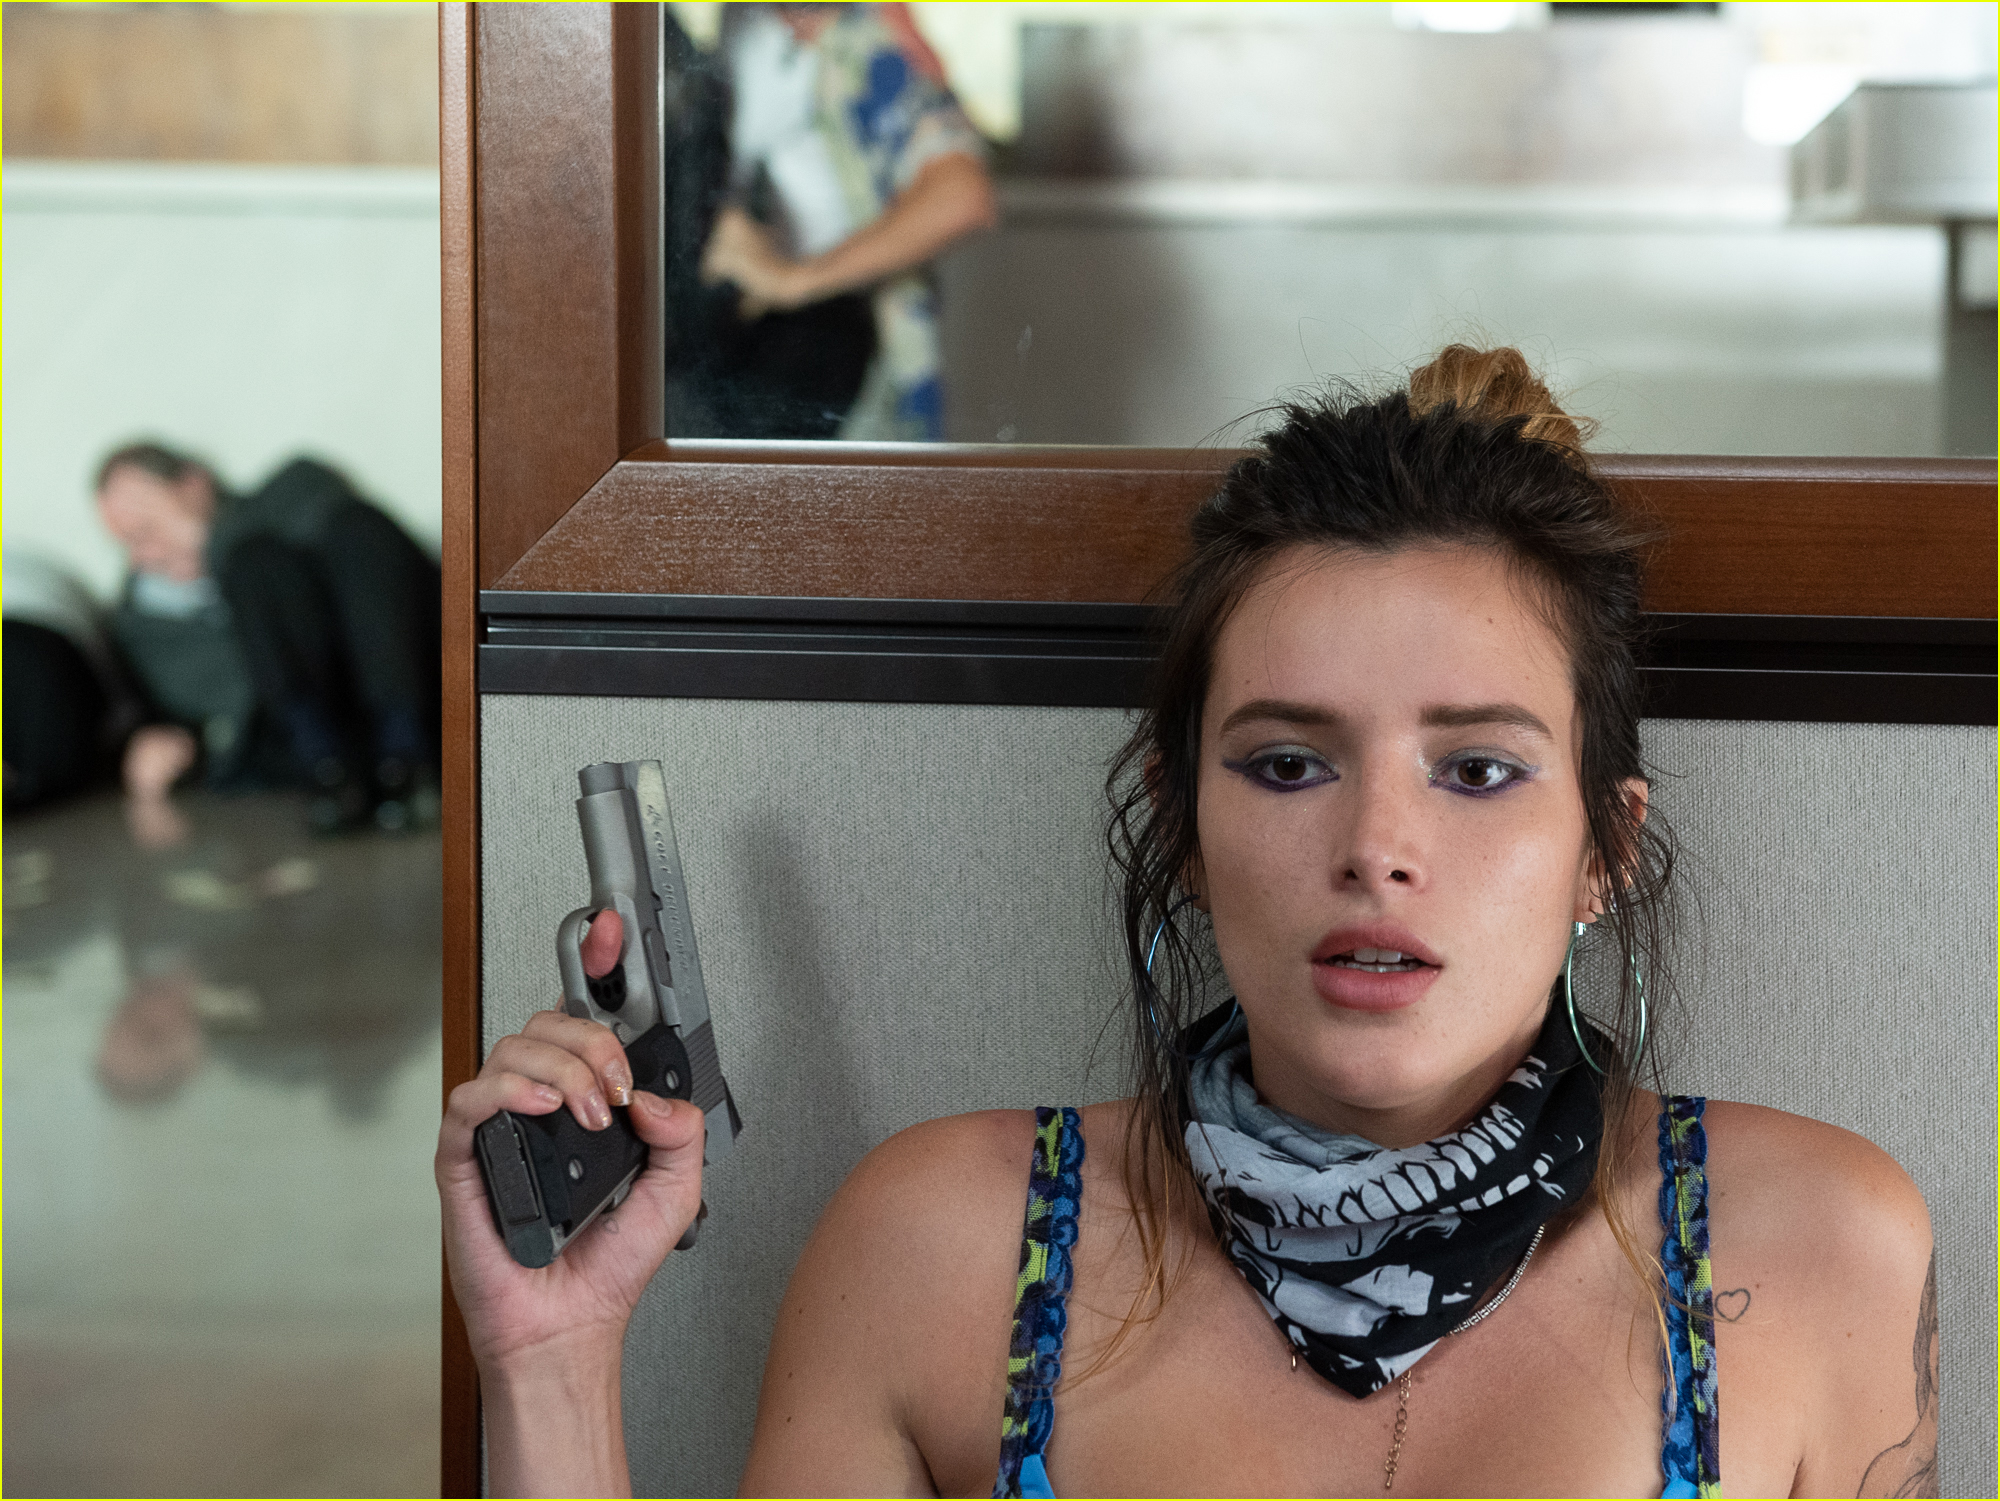 bella thorne is up to no good in infamous trailer 03